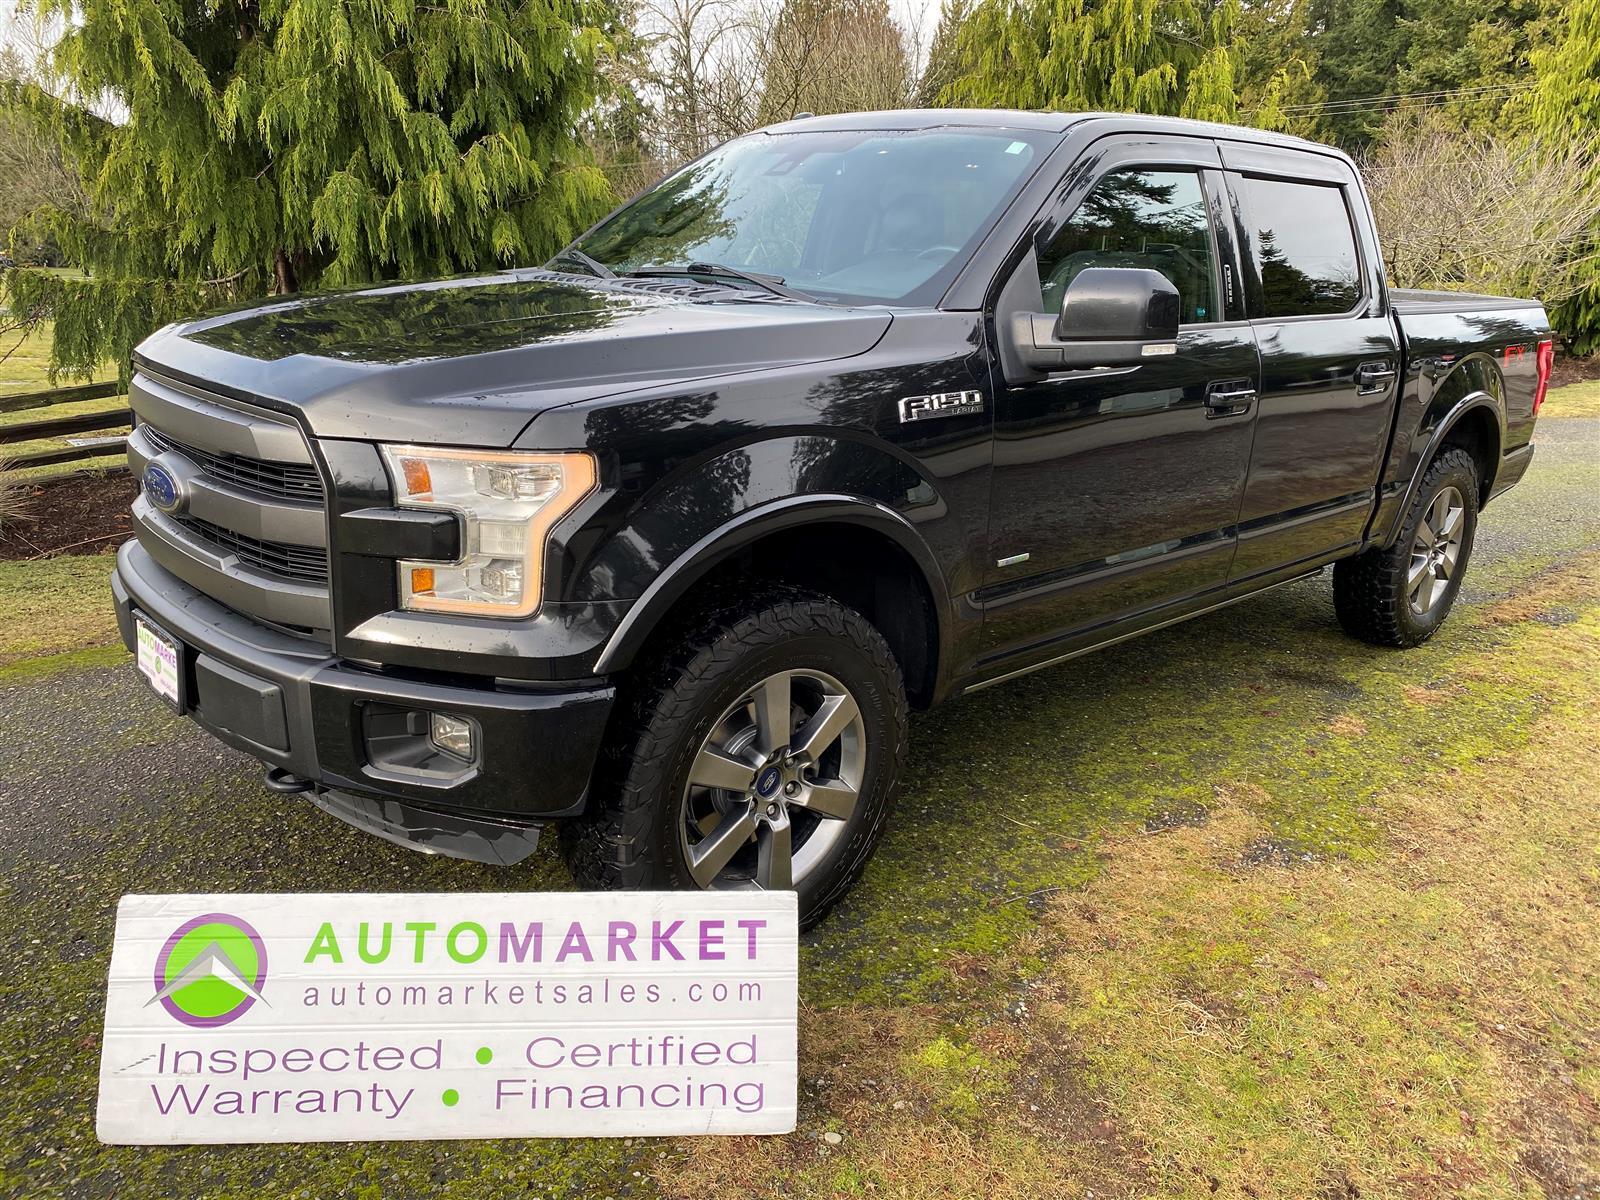 2015 Ford F-150 FX4, LTR, PANO ROOF, 3.5 E/B, WARRANTY, FINANCING,